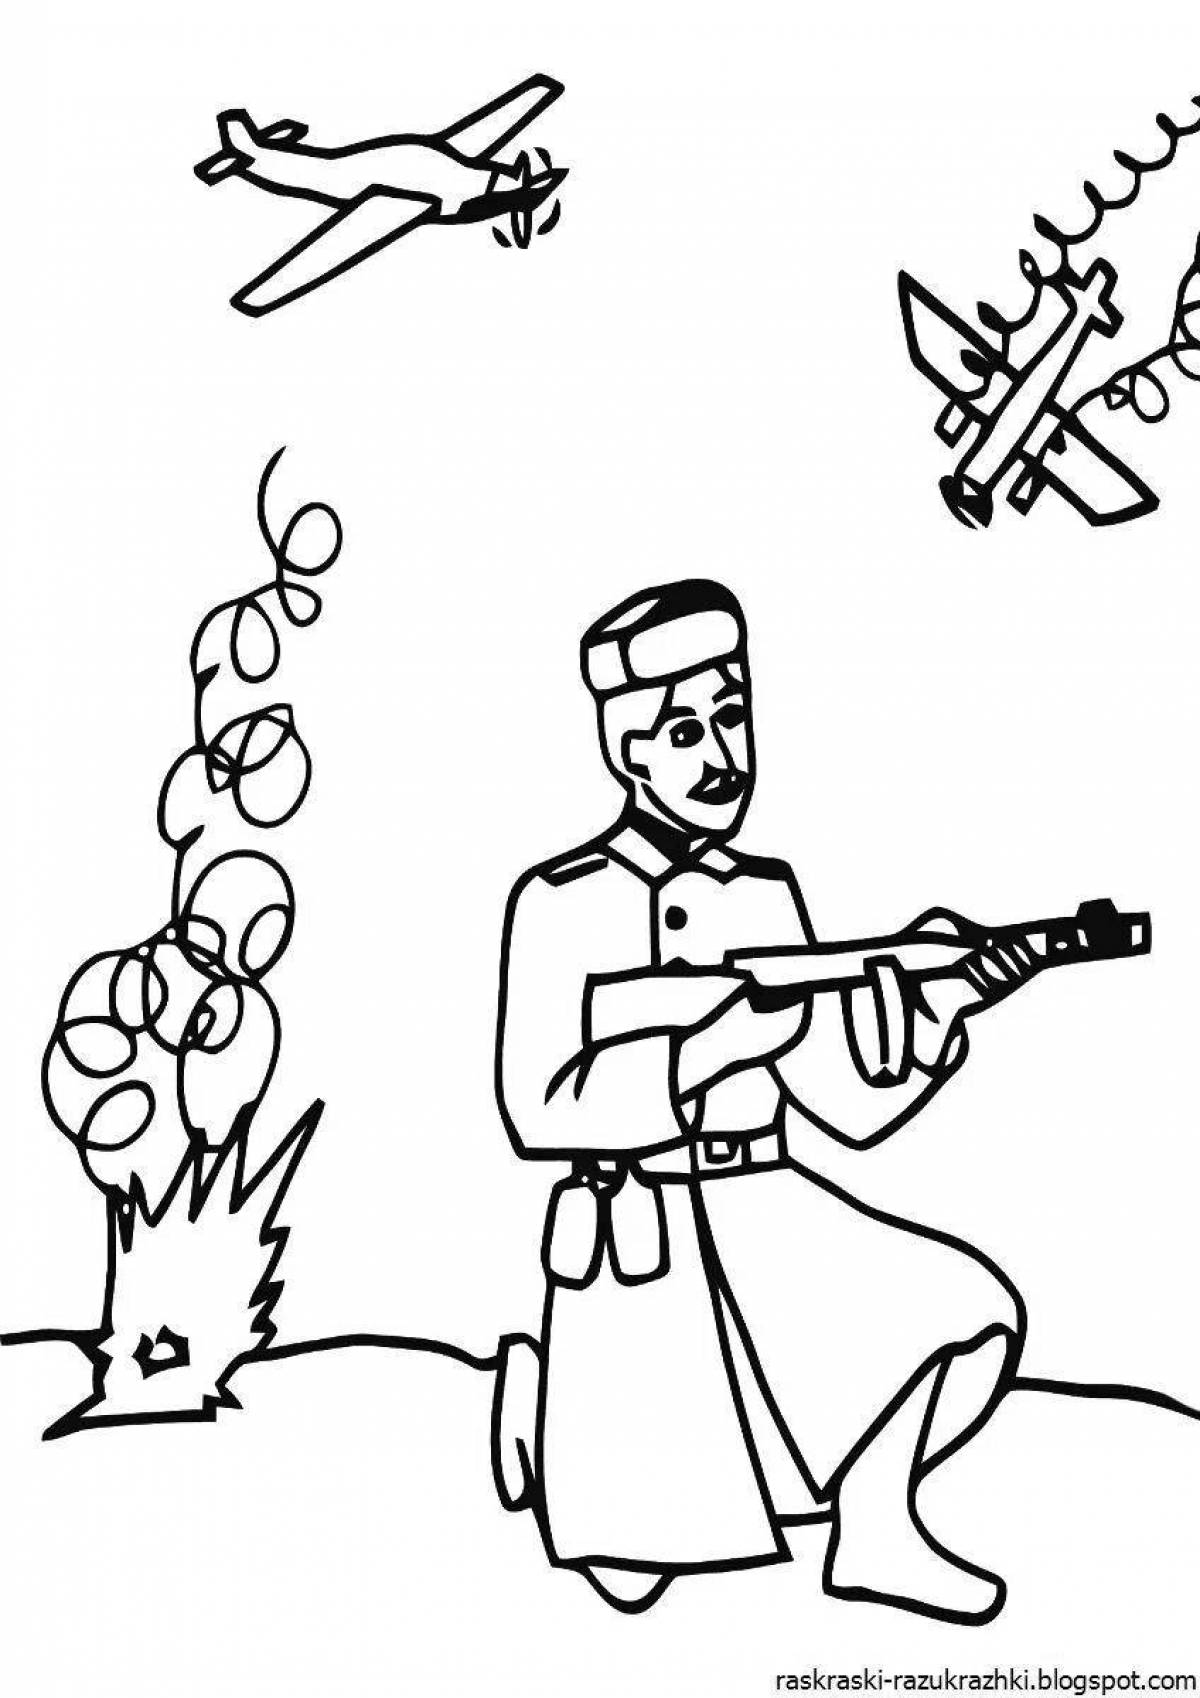 Coloring pages brave war heroes for kids